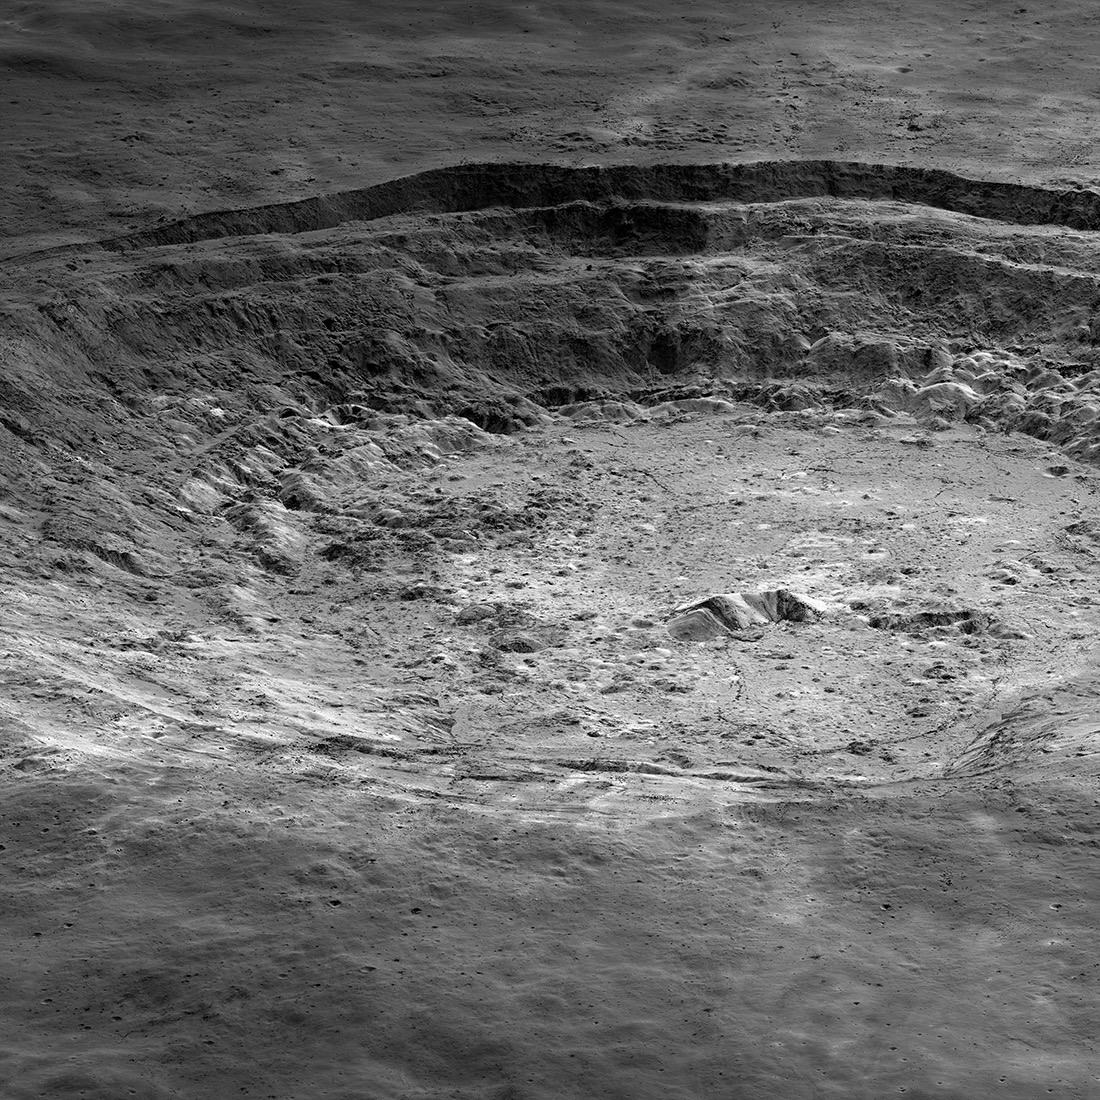 Detail photo of crater on the Moon.